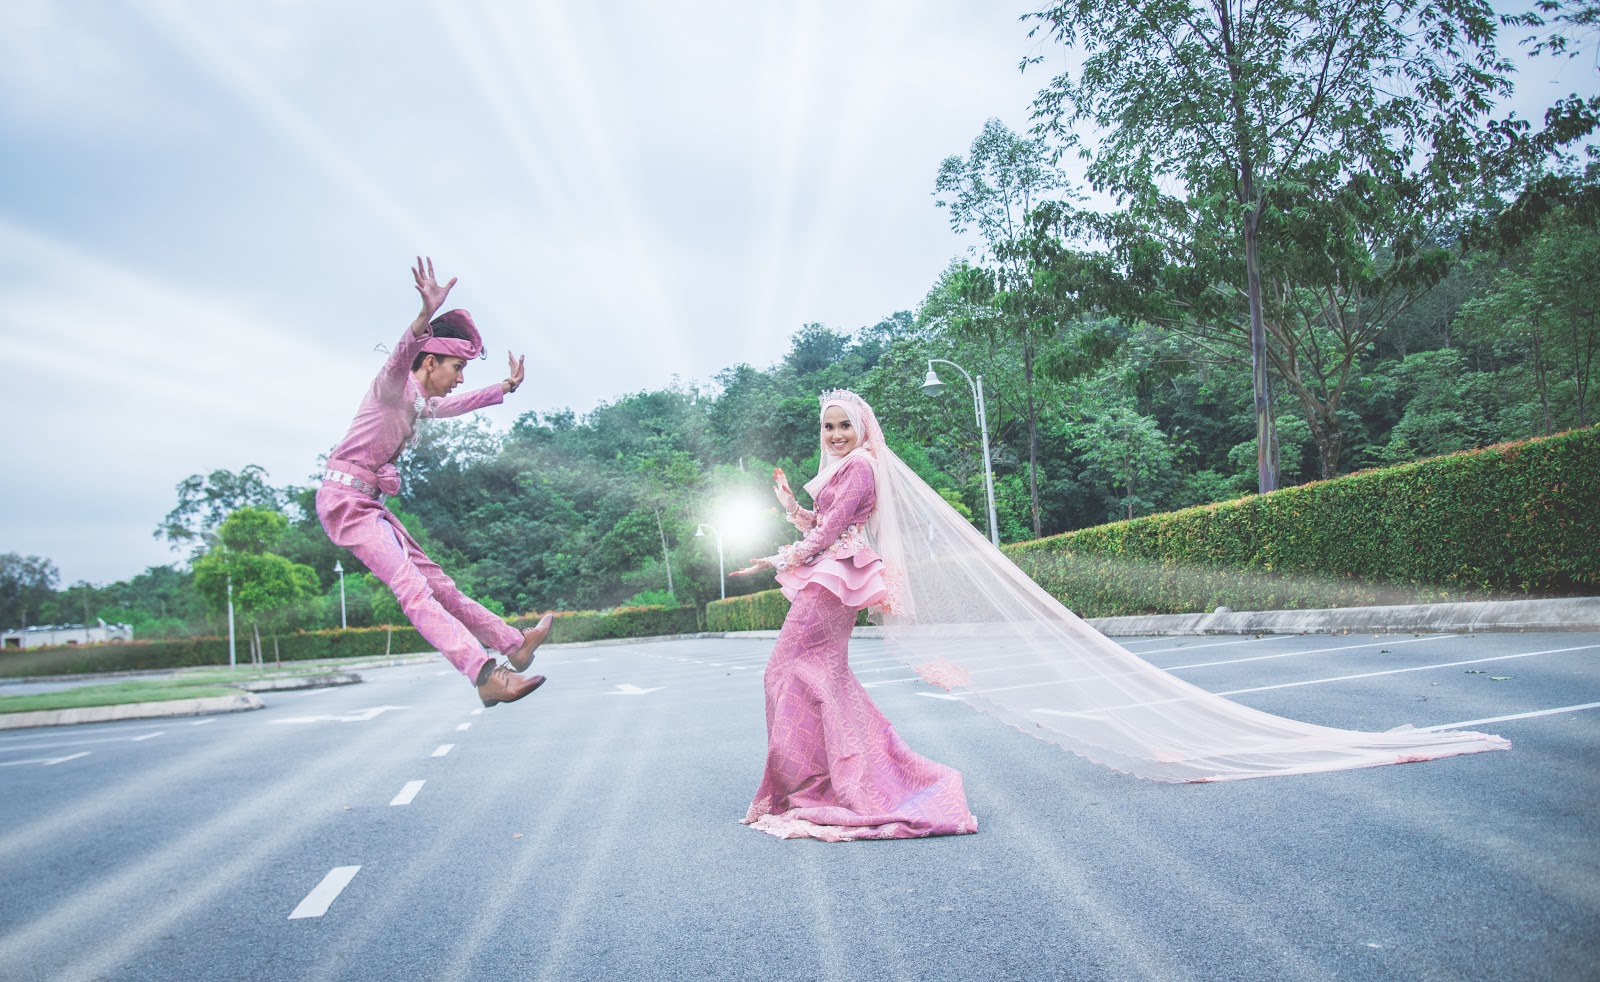 Hadouken Malay Prewedding Photo by CJ Photography - Malaysia's Best Wedding Photographers at Recommend.my